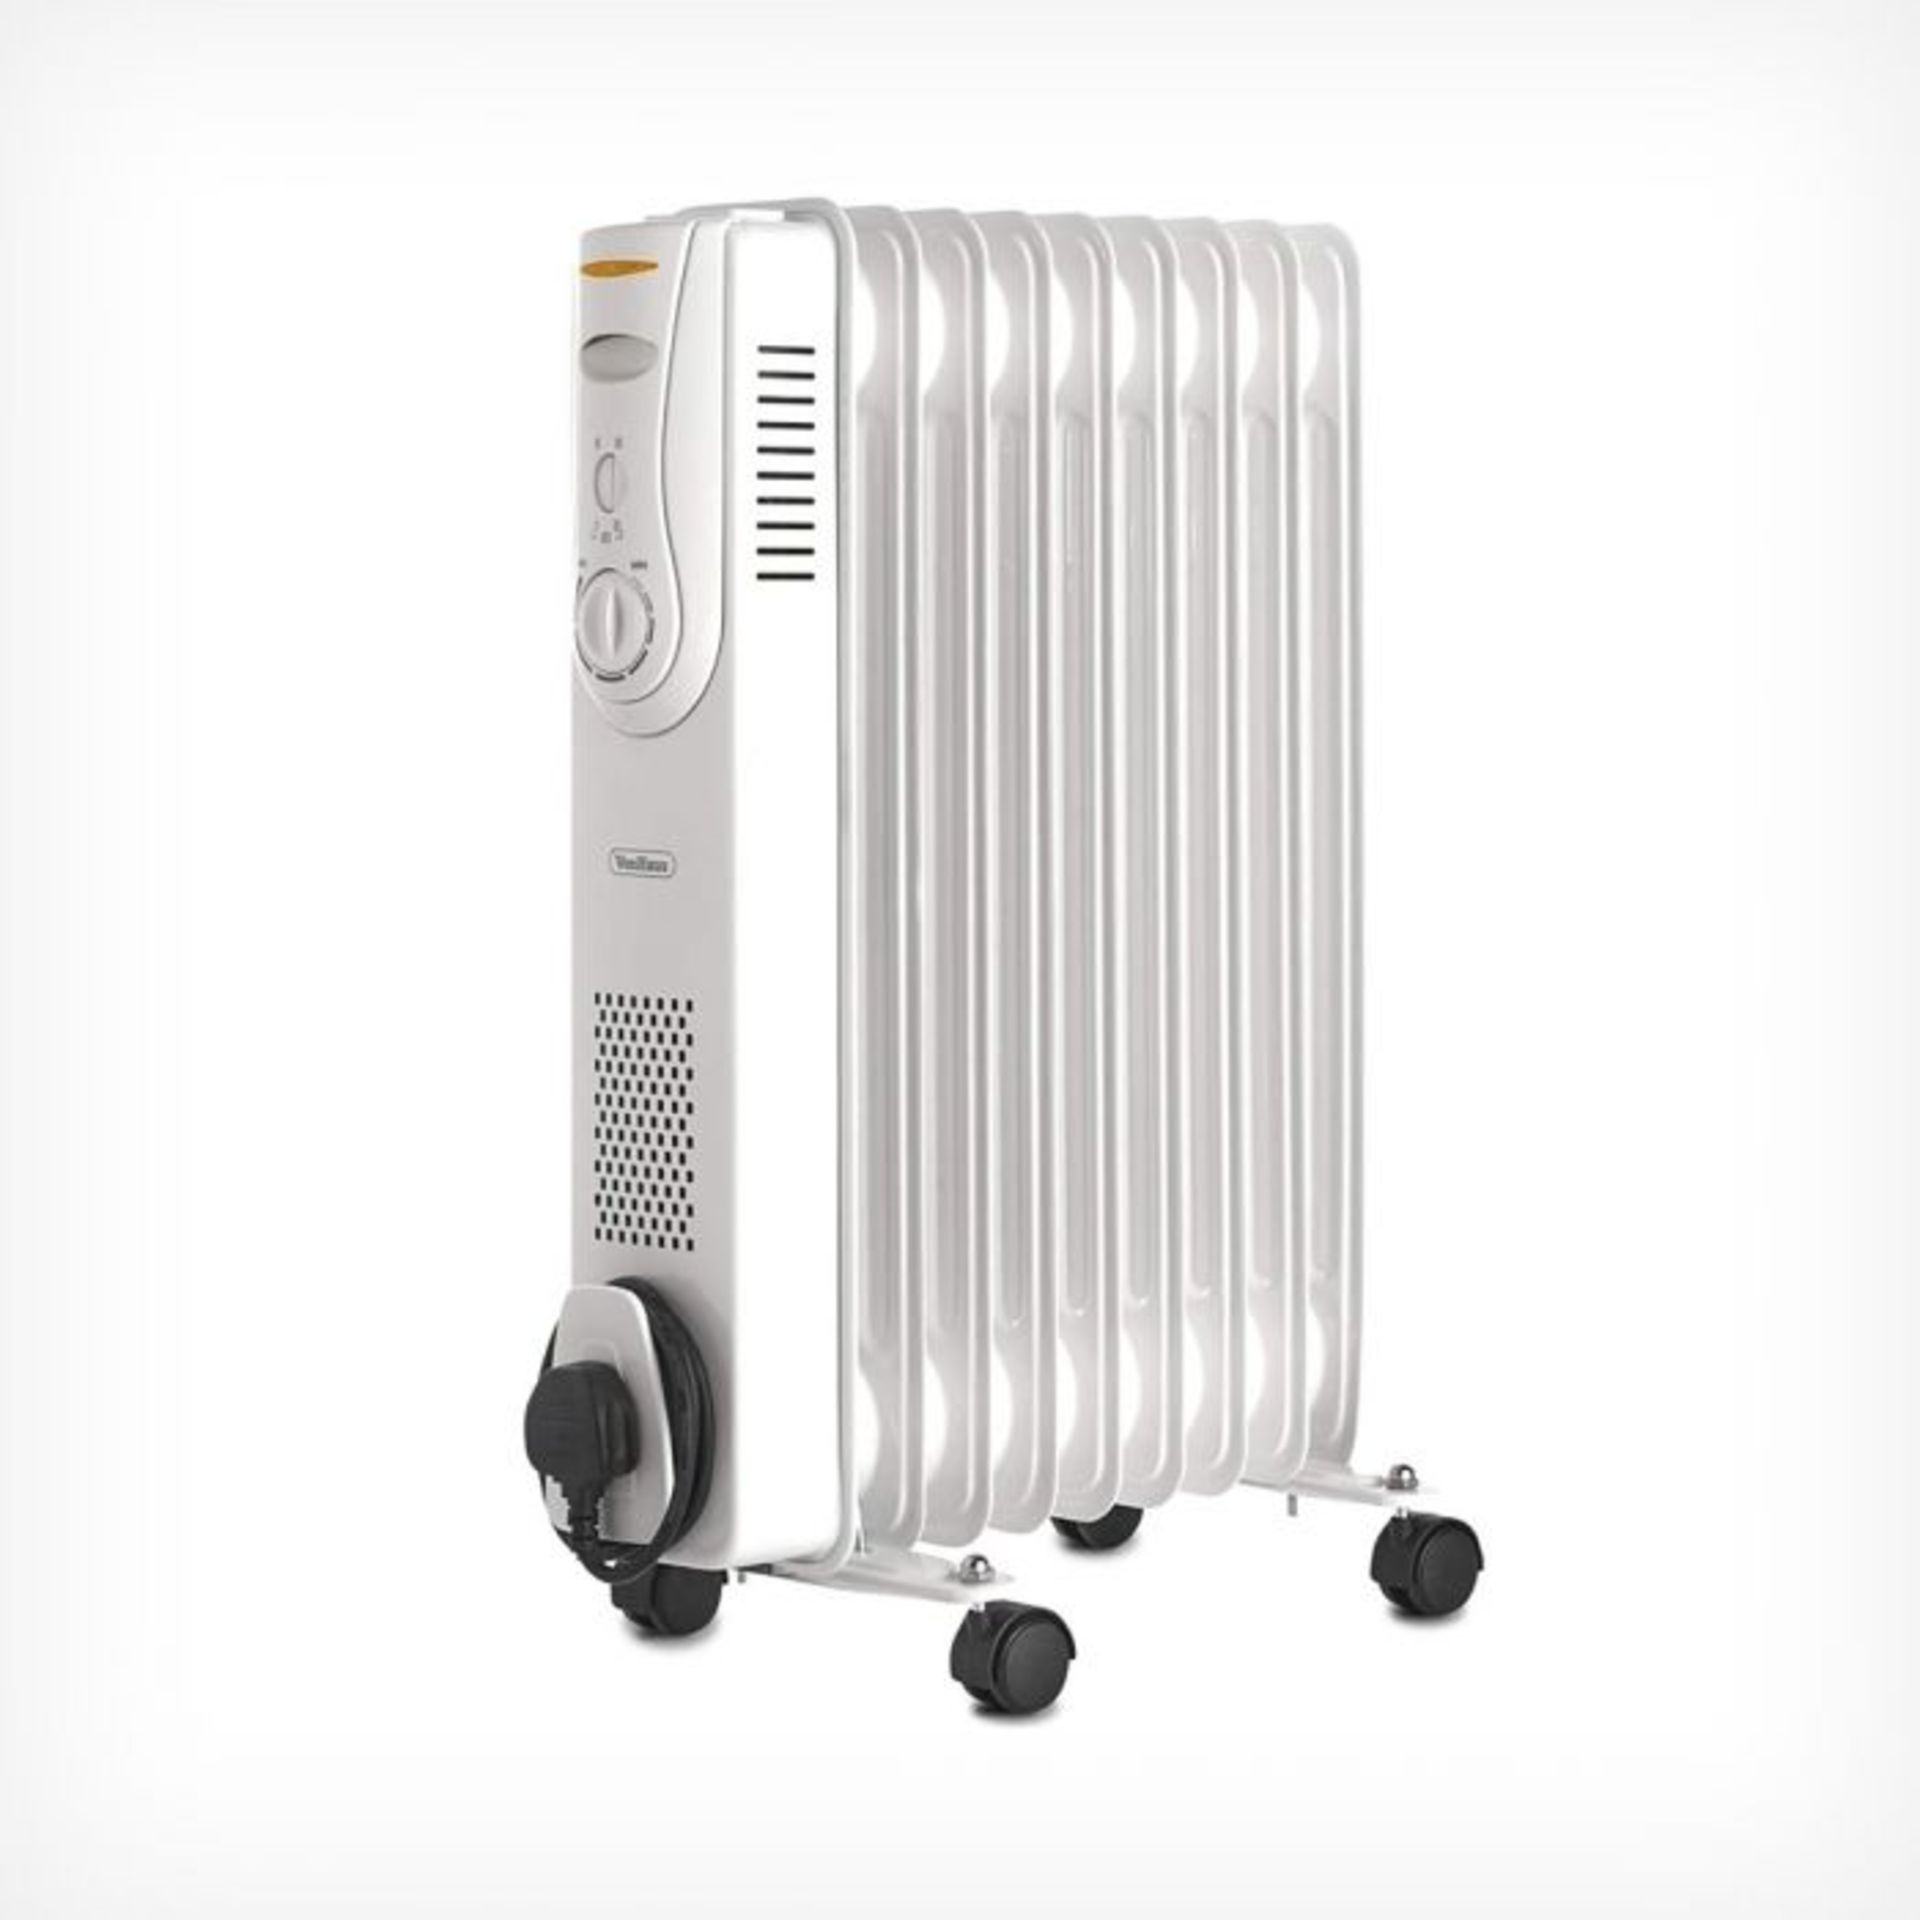 (S45) 9 Fin 2000W Oil Filled Radiator - White Powerful 2000W radiator with 9 oil-filled fins ?... - Image 3 of 3